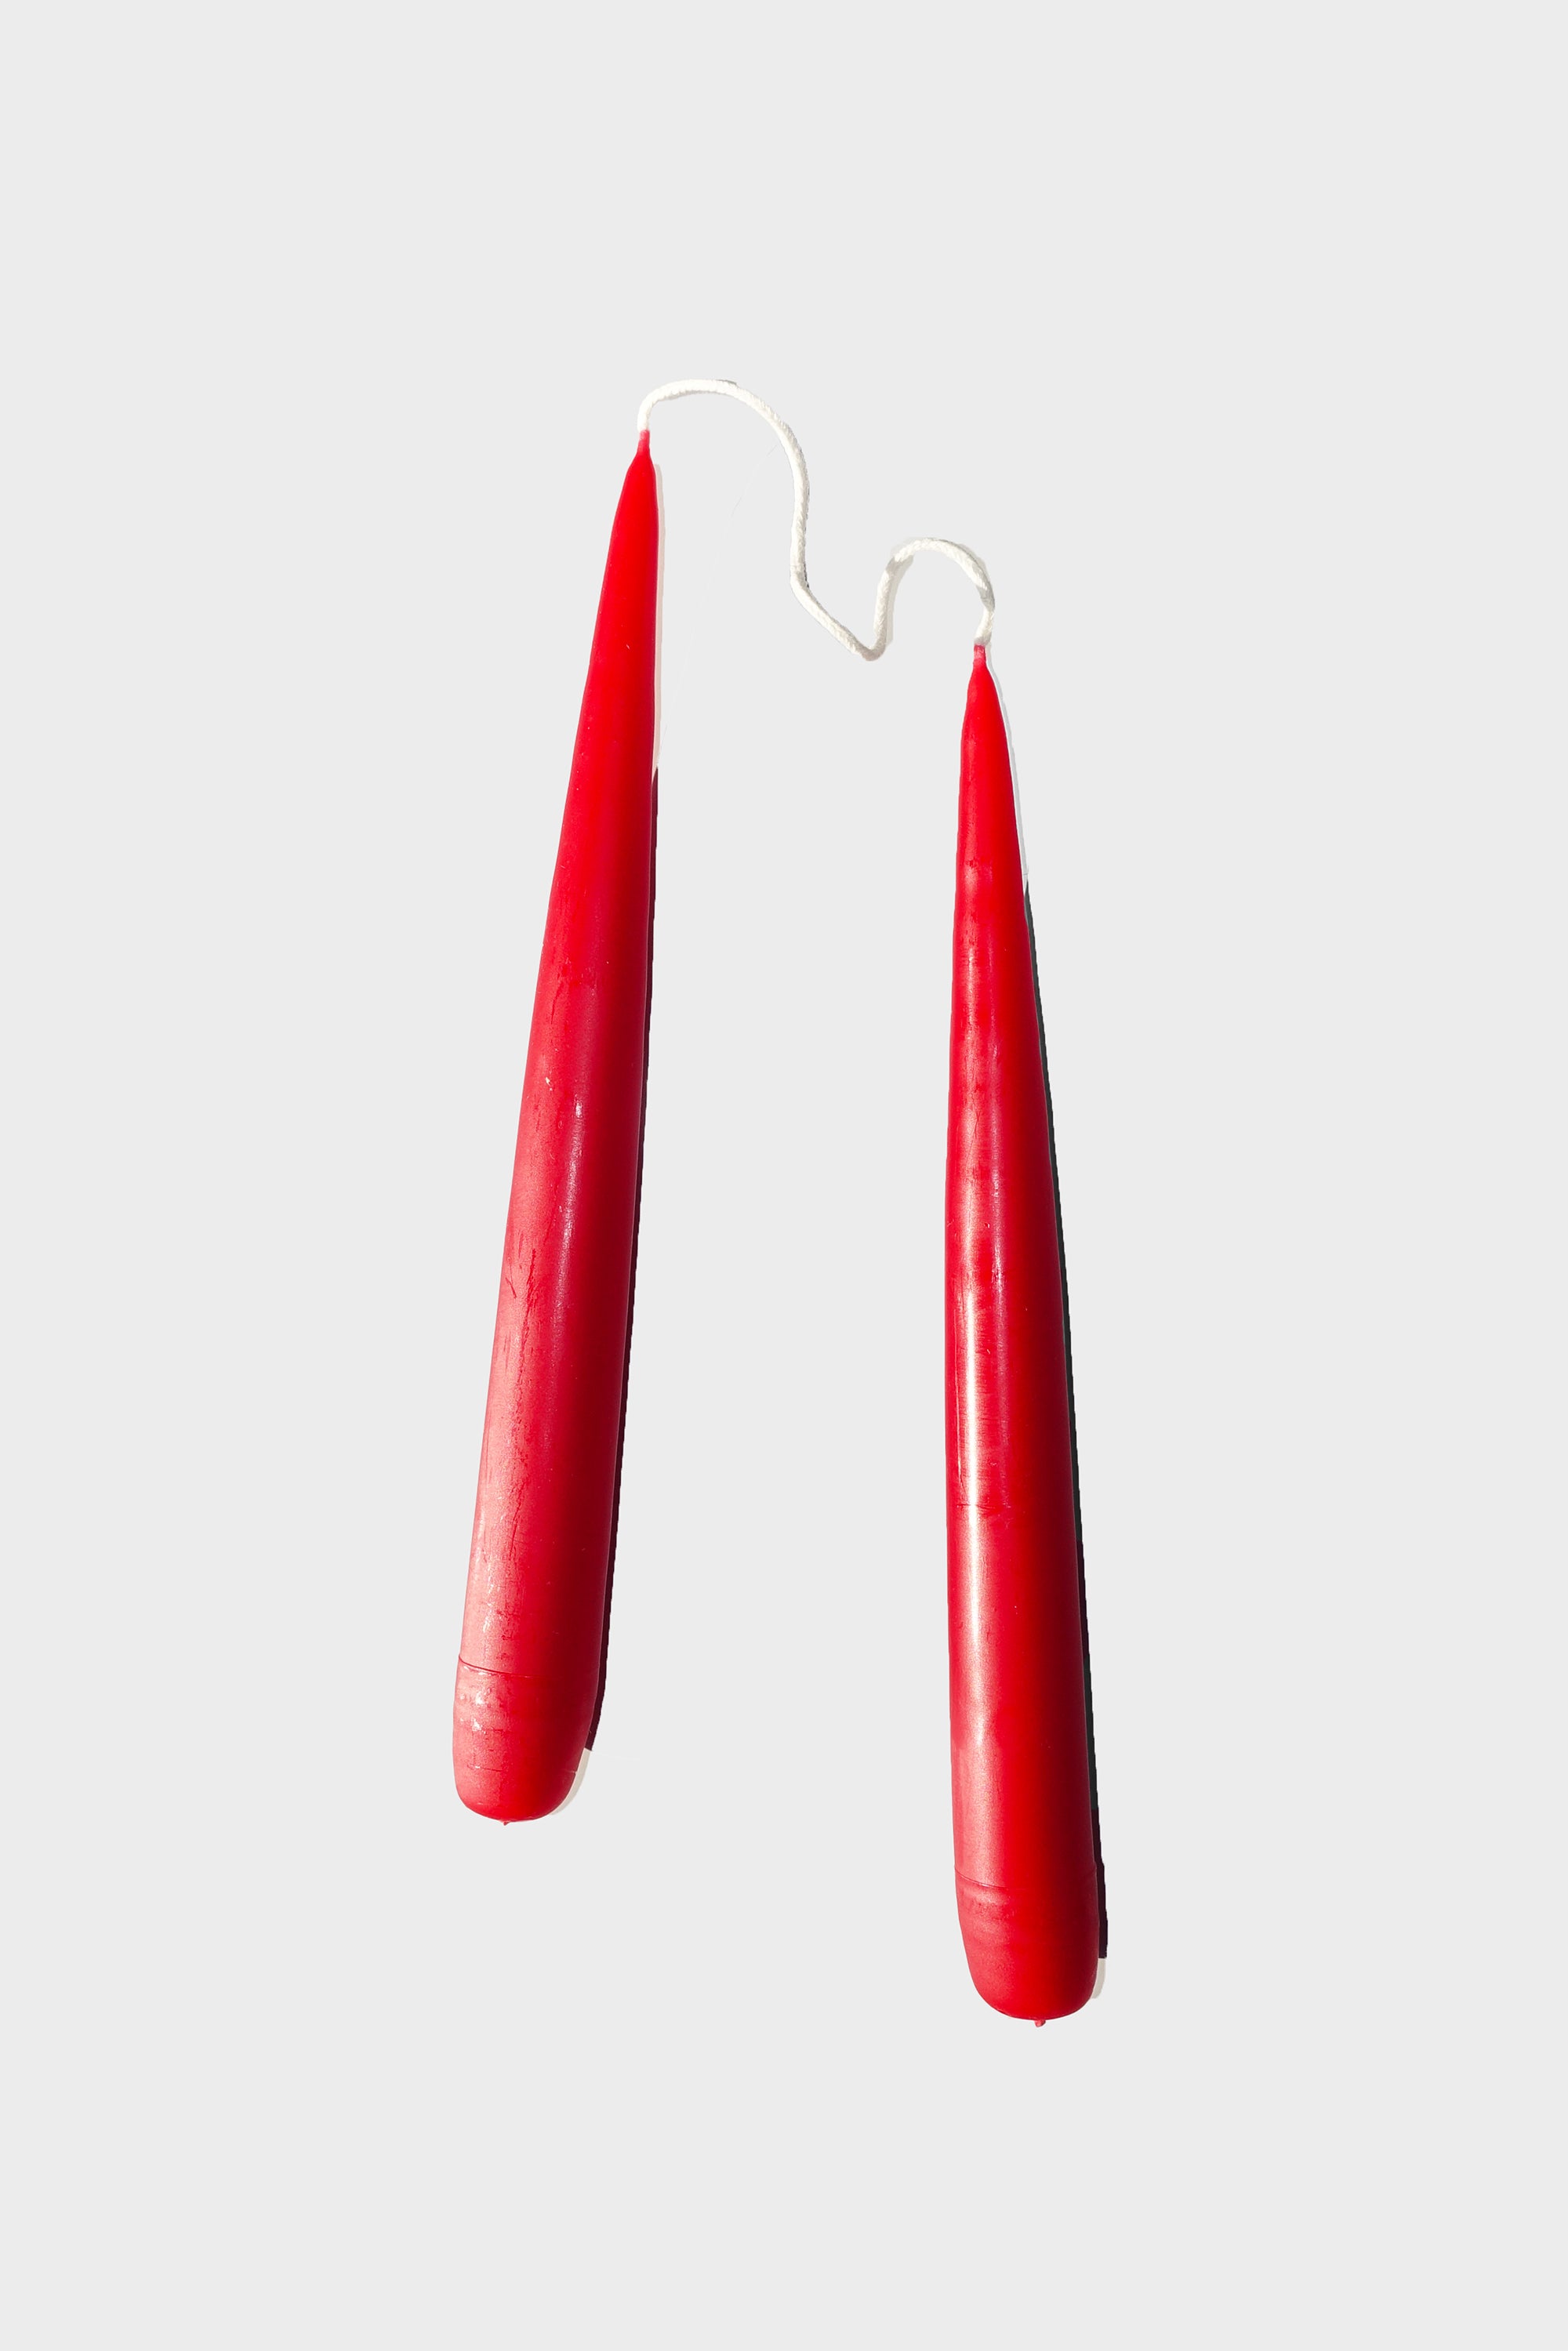 09" Taper Candles in Red Red